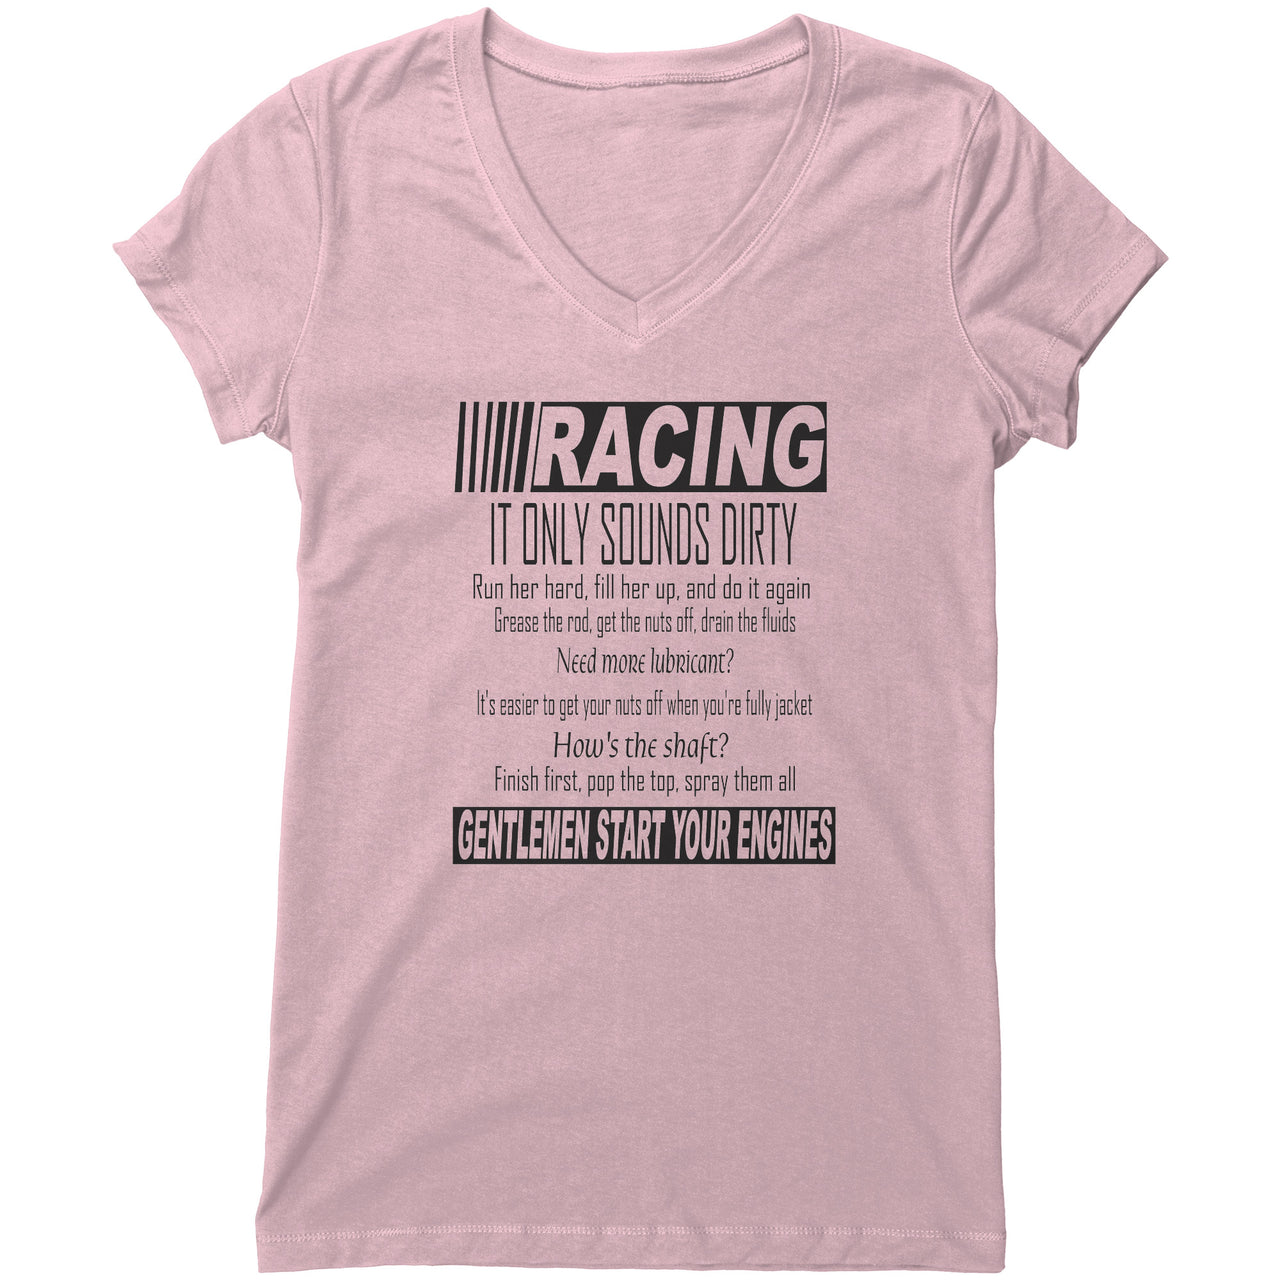 Racing It only sounds dirty Women's T-Shirts/Hoodies BV